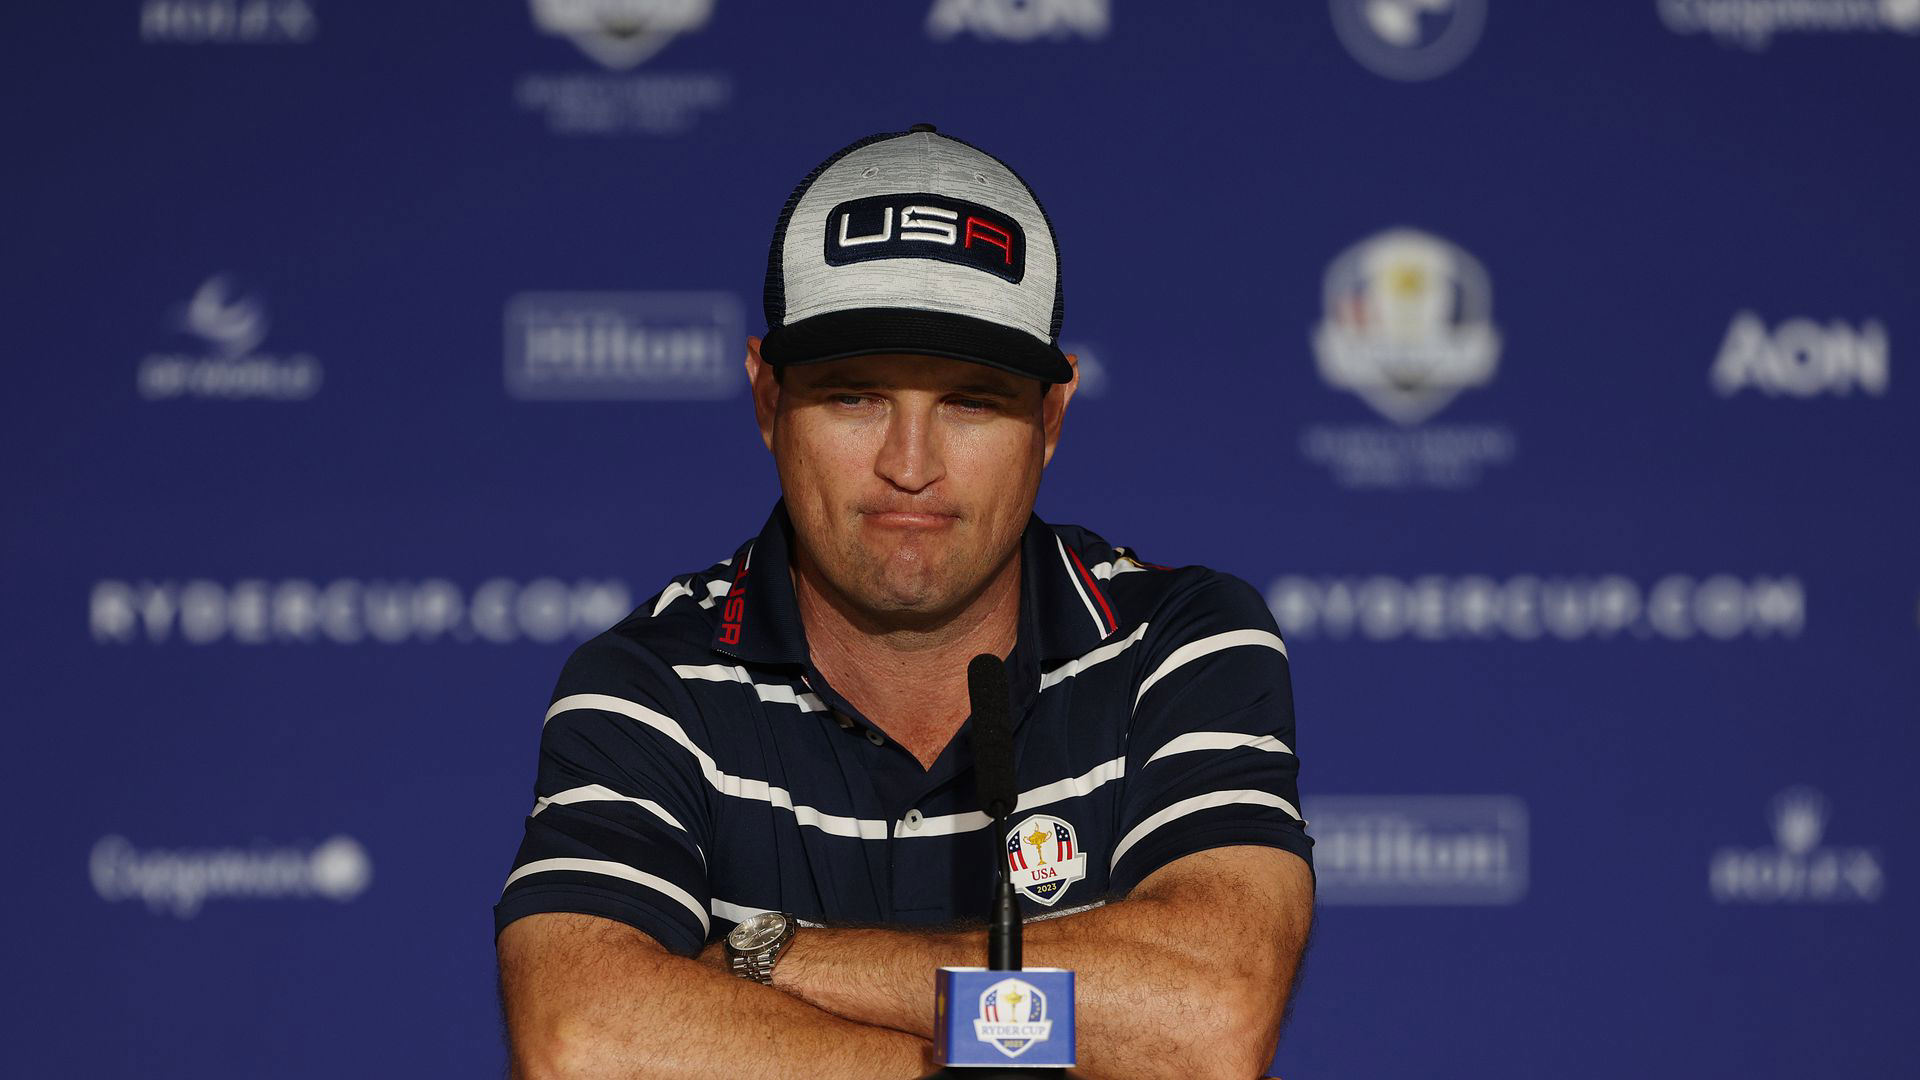 Zach Johnson trolled online after Team USA Ryder Cup Day 2 pairings